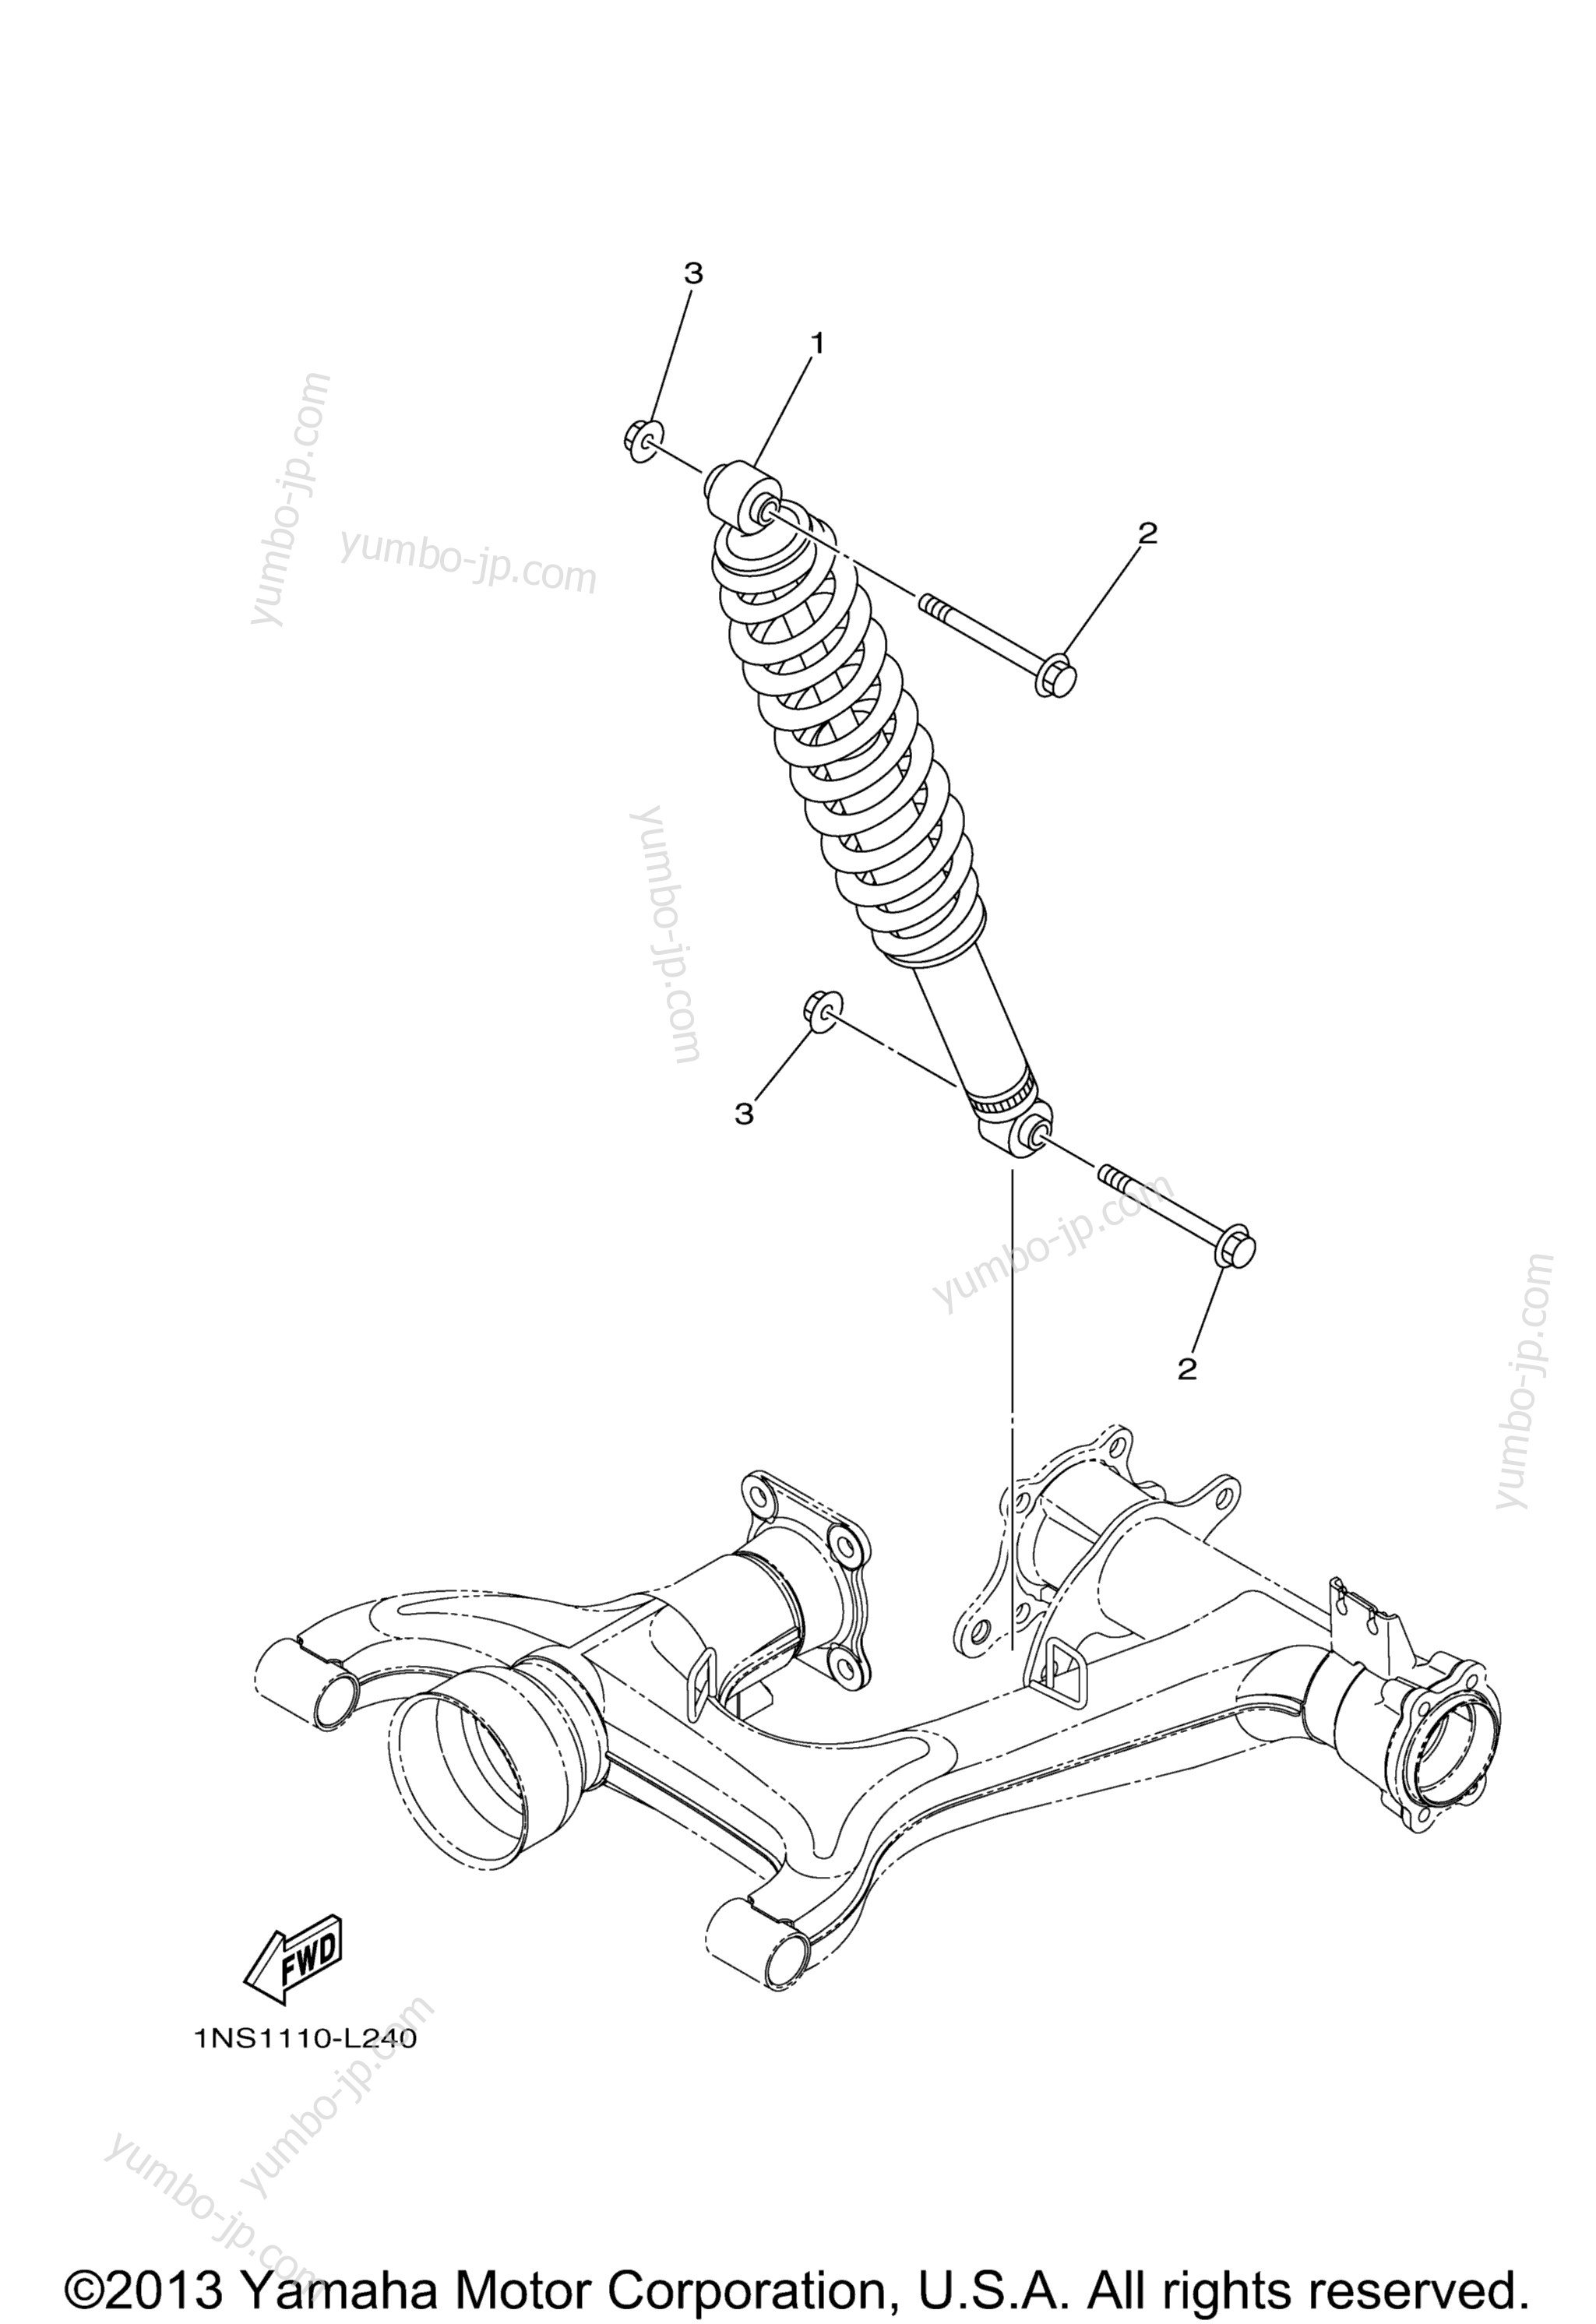 Rear Suspension for ATVs YAMAHA GRIZZLY 350 (YFM350DEL) 2014 year